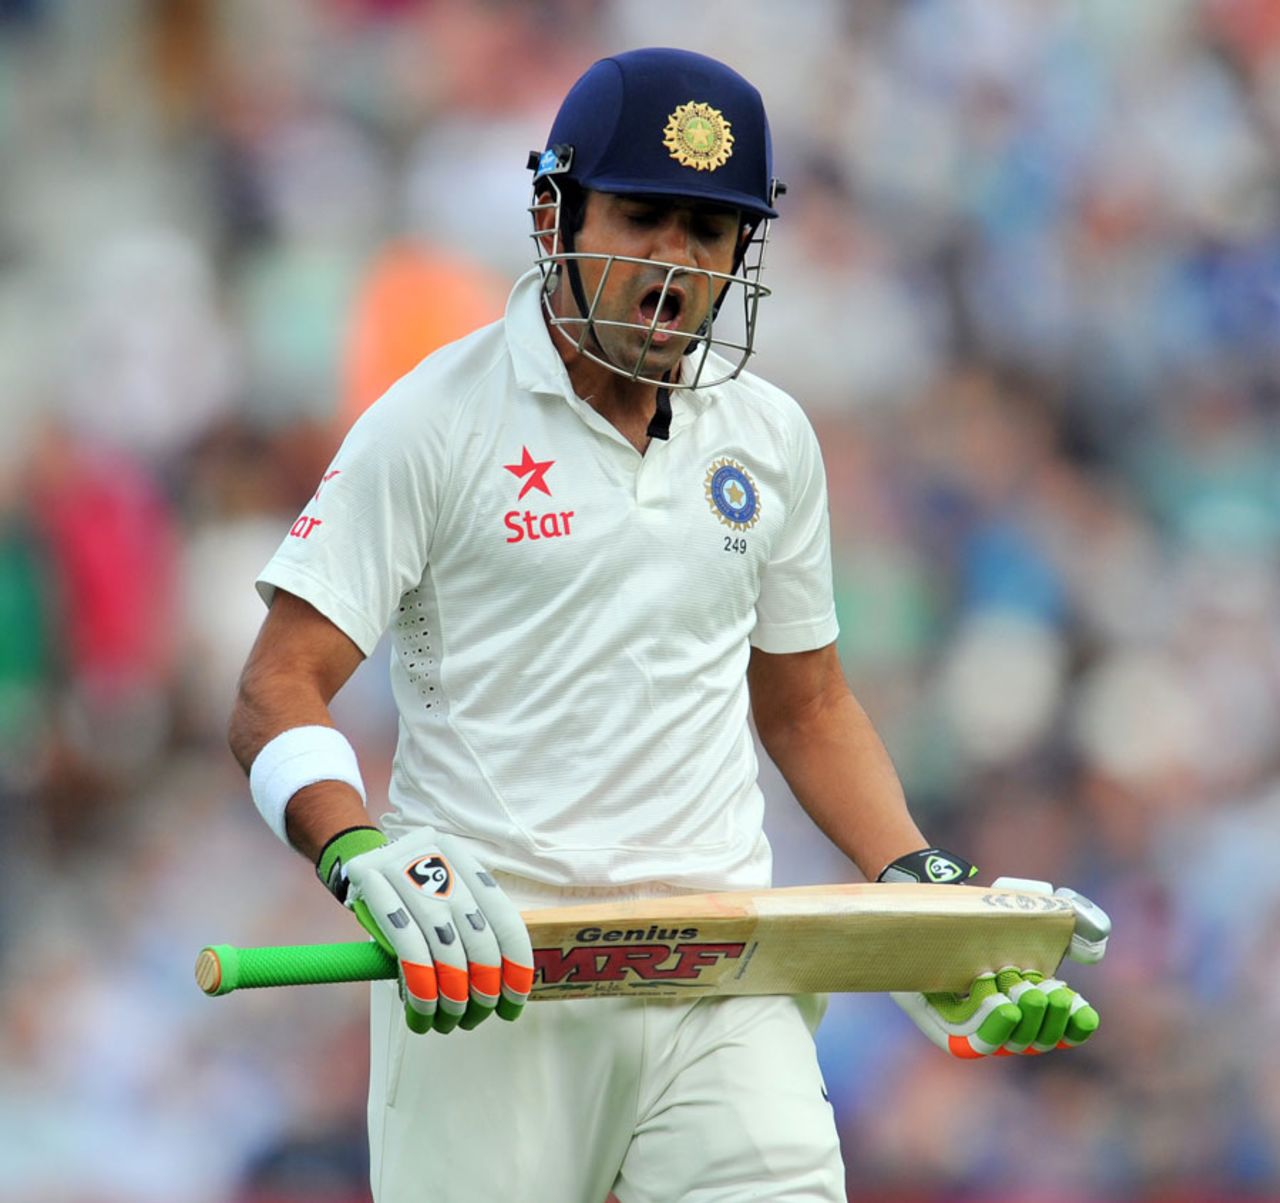 Gautam Gambhir is distraught after his first golden duck, England v India, 5th Investec Test, The Oval, 1st day, August 15, 2014